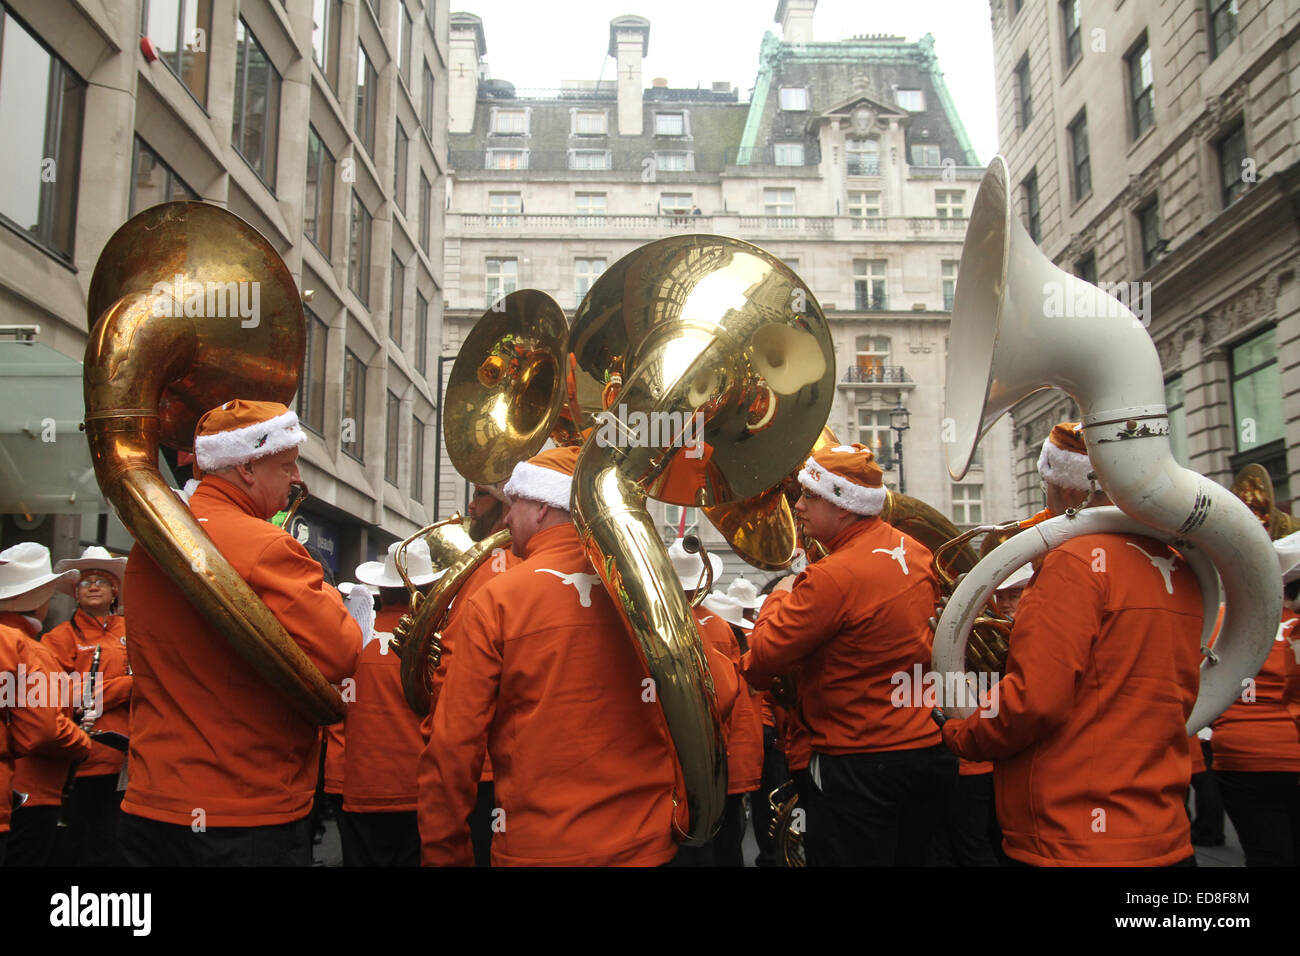 London, UK. 1 January 2015. University of Texas Longhorn band members do a final rehearsal ahead of the parade start at noon. Londoners and tourists turned up in droves for the new years parade. The annual parade goes through Piccadilly, Regents street, Pall Mall and Whitehall a 2 mile route. Photo: David Mbiyu/ Alamy Live News Stock Photo